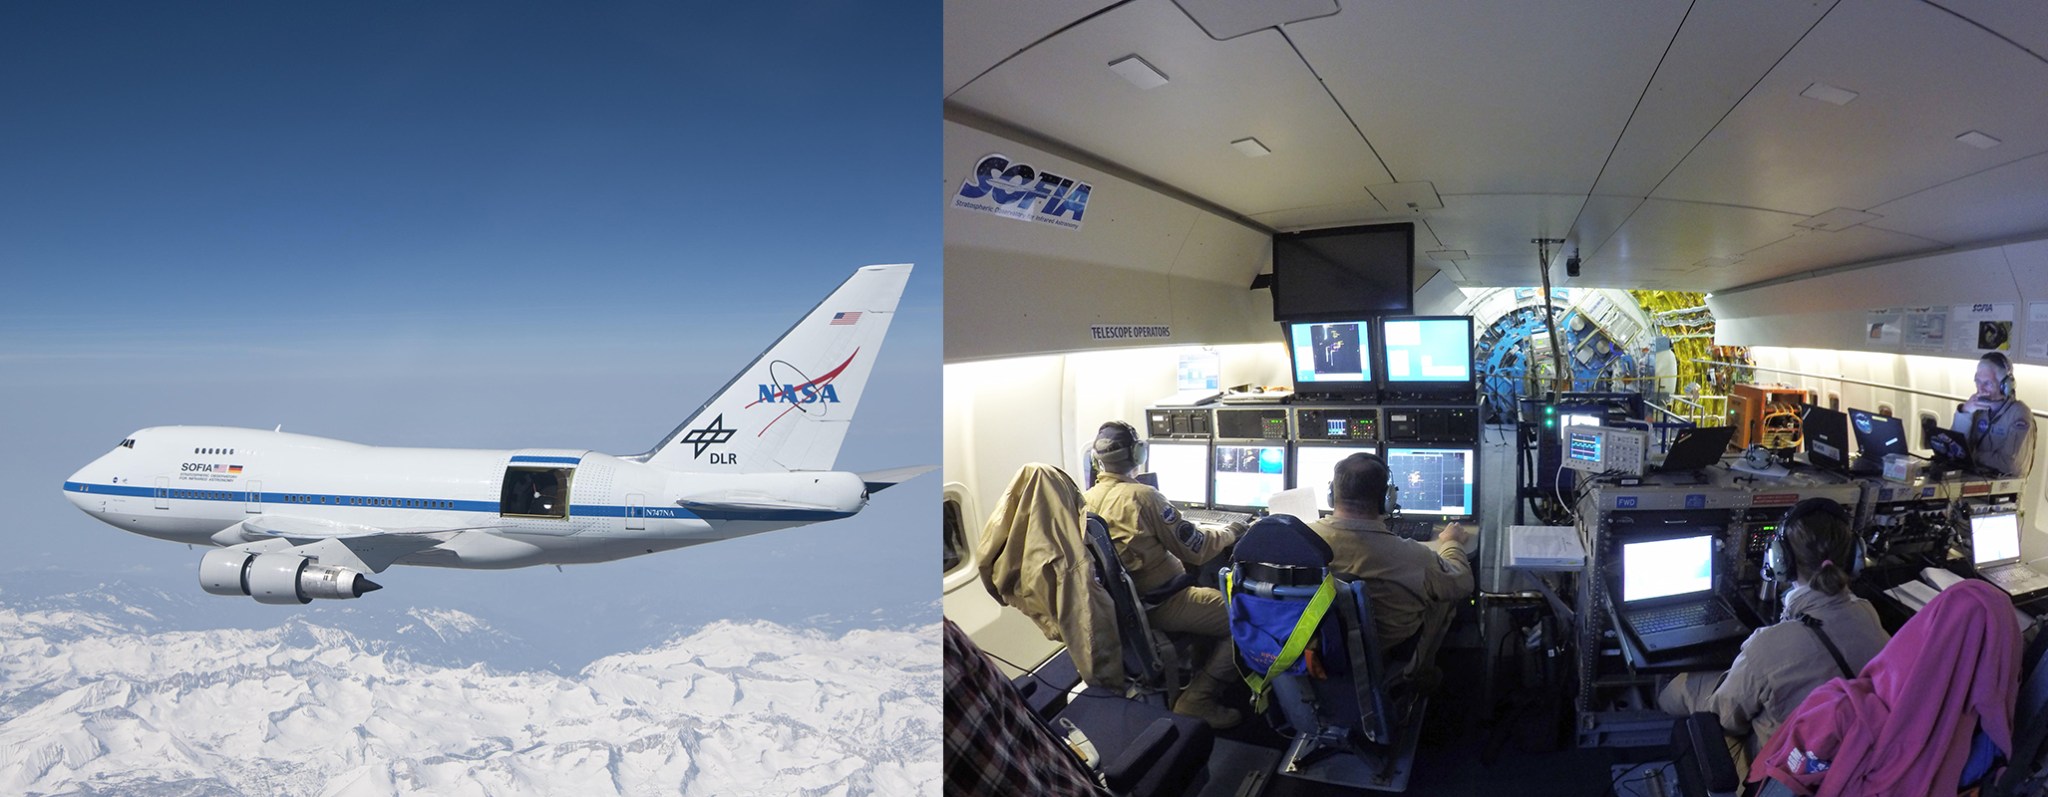 SOFIA flying over snow covered mountains with it's telescope door open next to image of crew working inside the cabin.